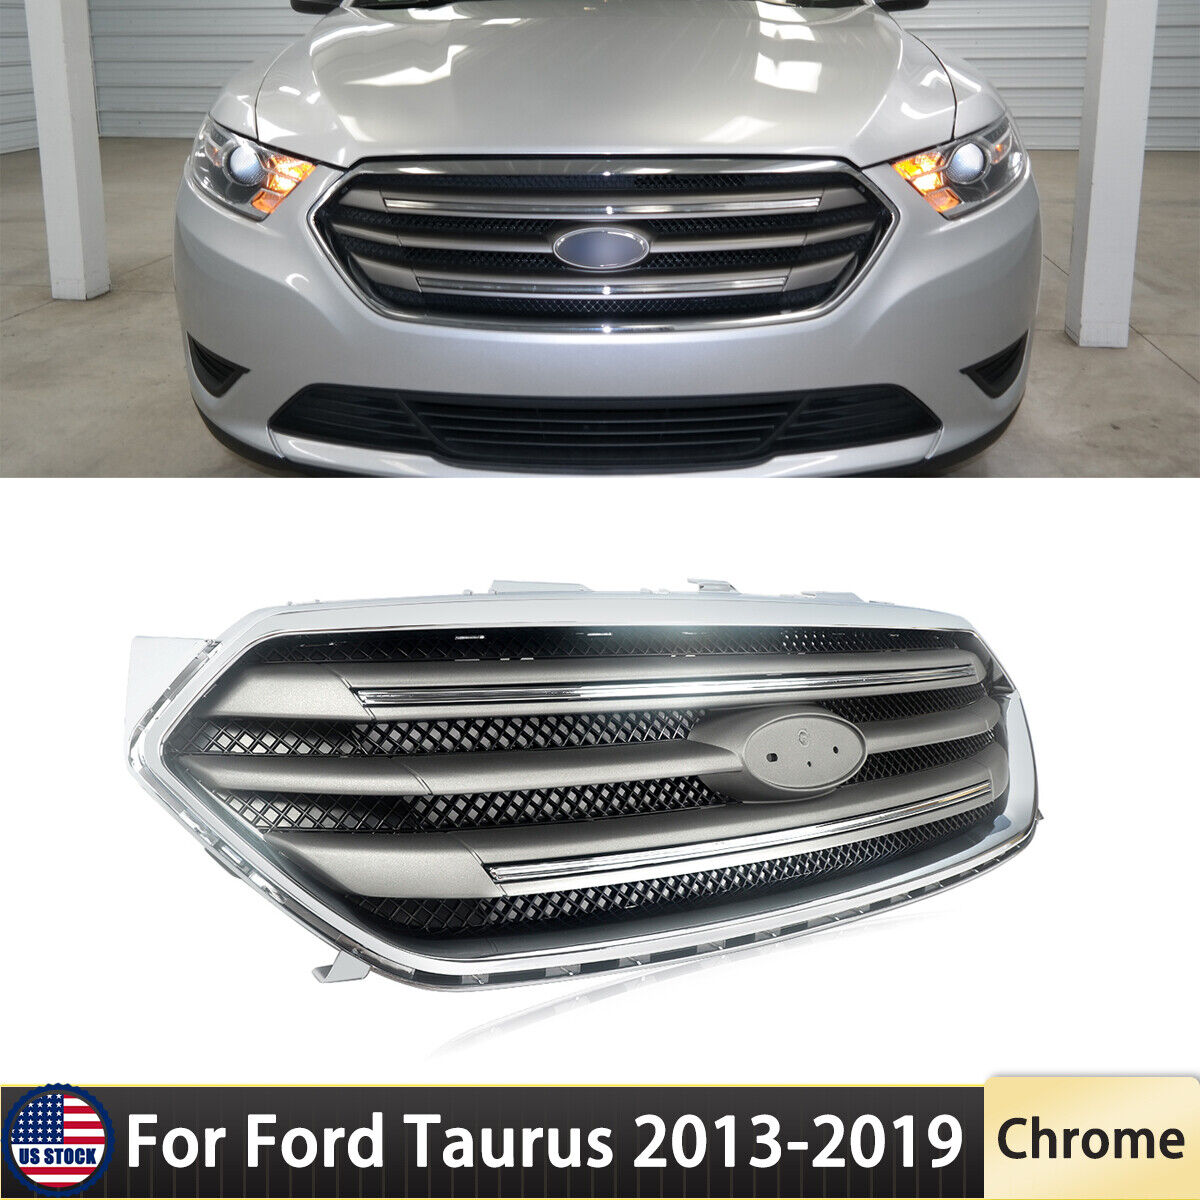 For Ford Taurus 2013-2019 Front Bumper Upper Grille Assembly Chrome Factory